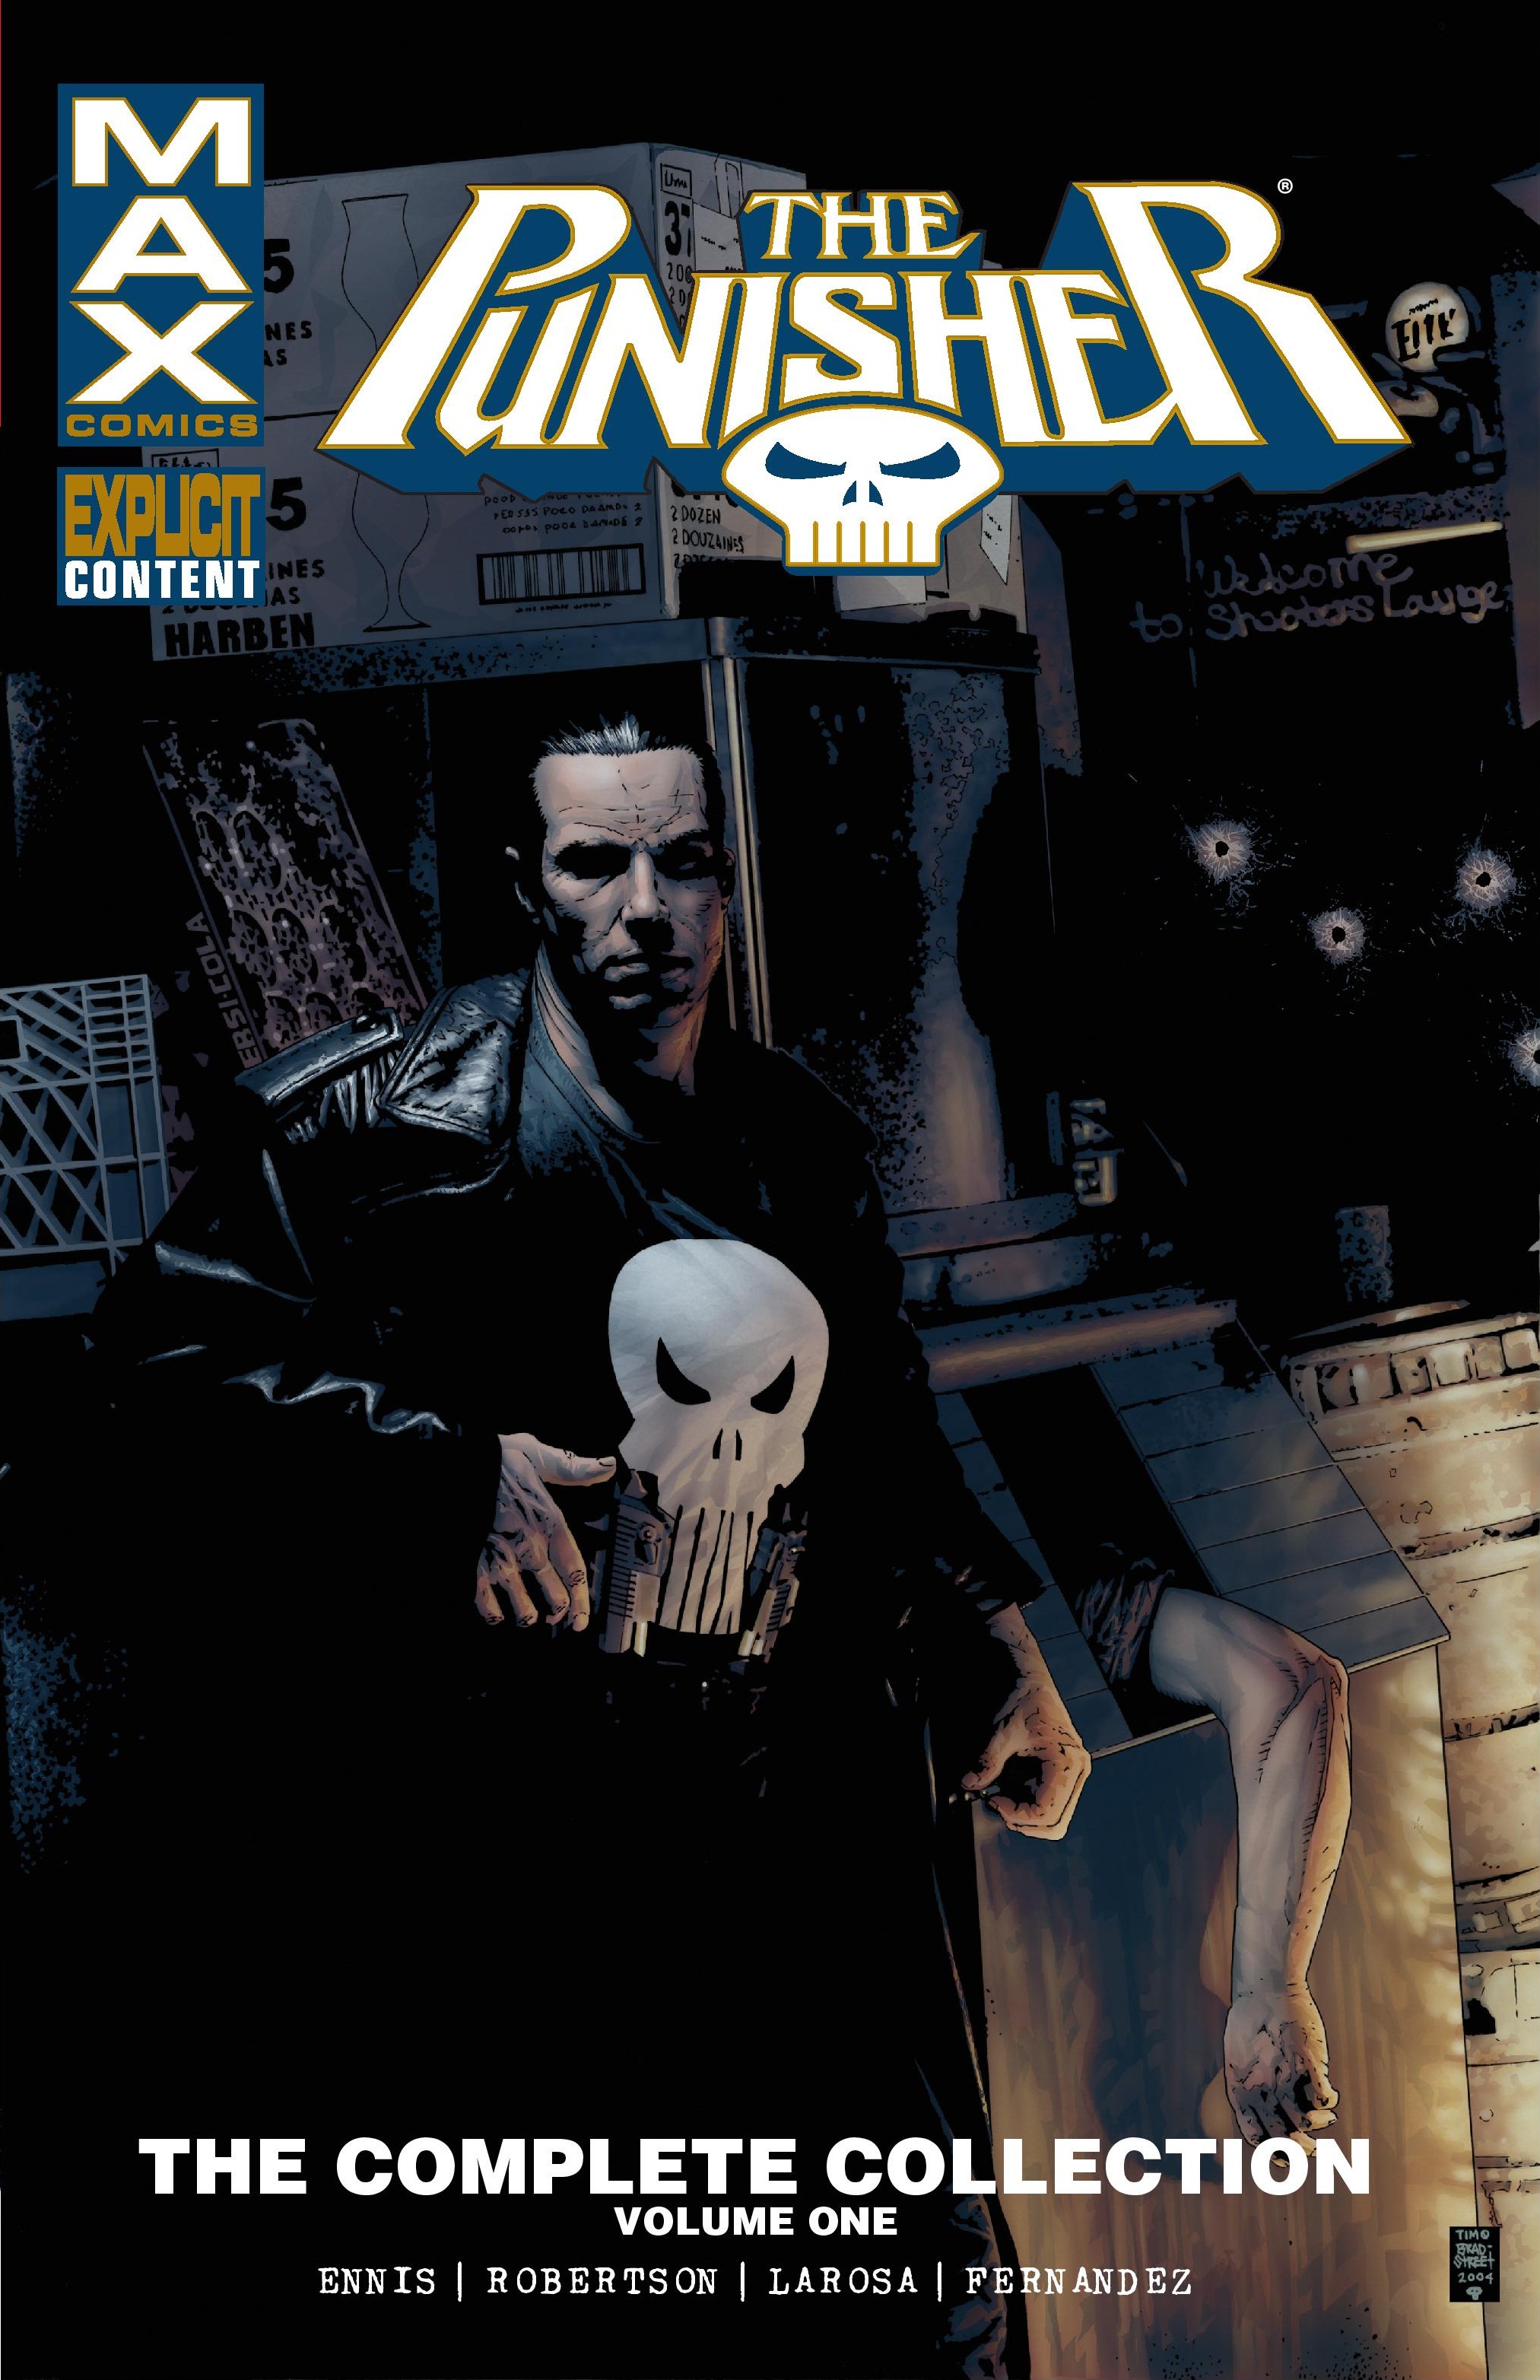 Punisher Max: The Complete Collection Vol. 1 (Trade Paperback)